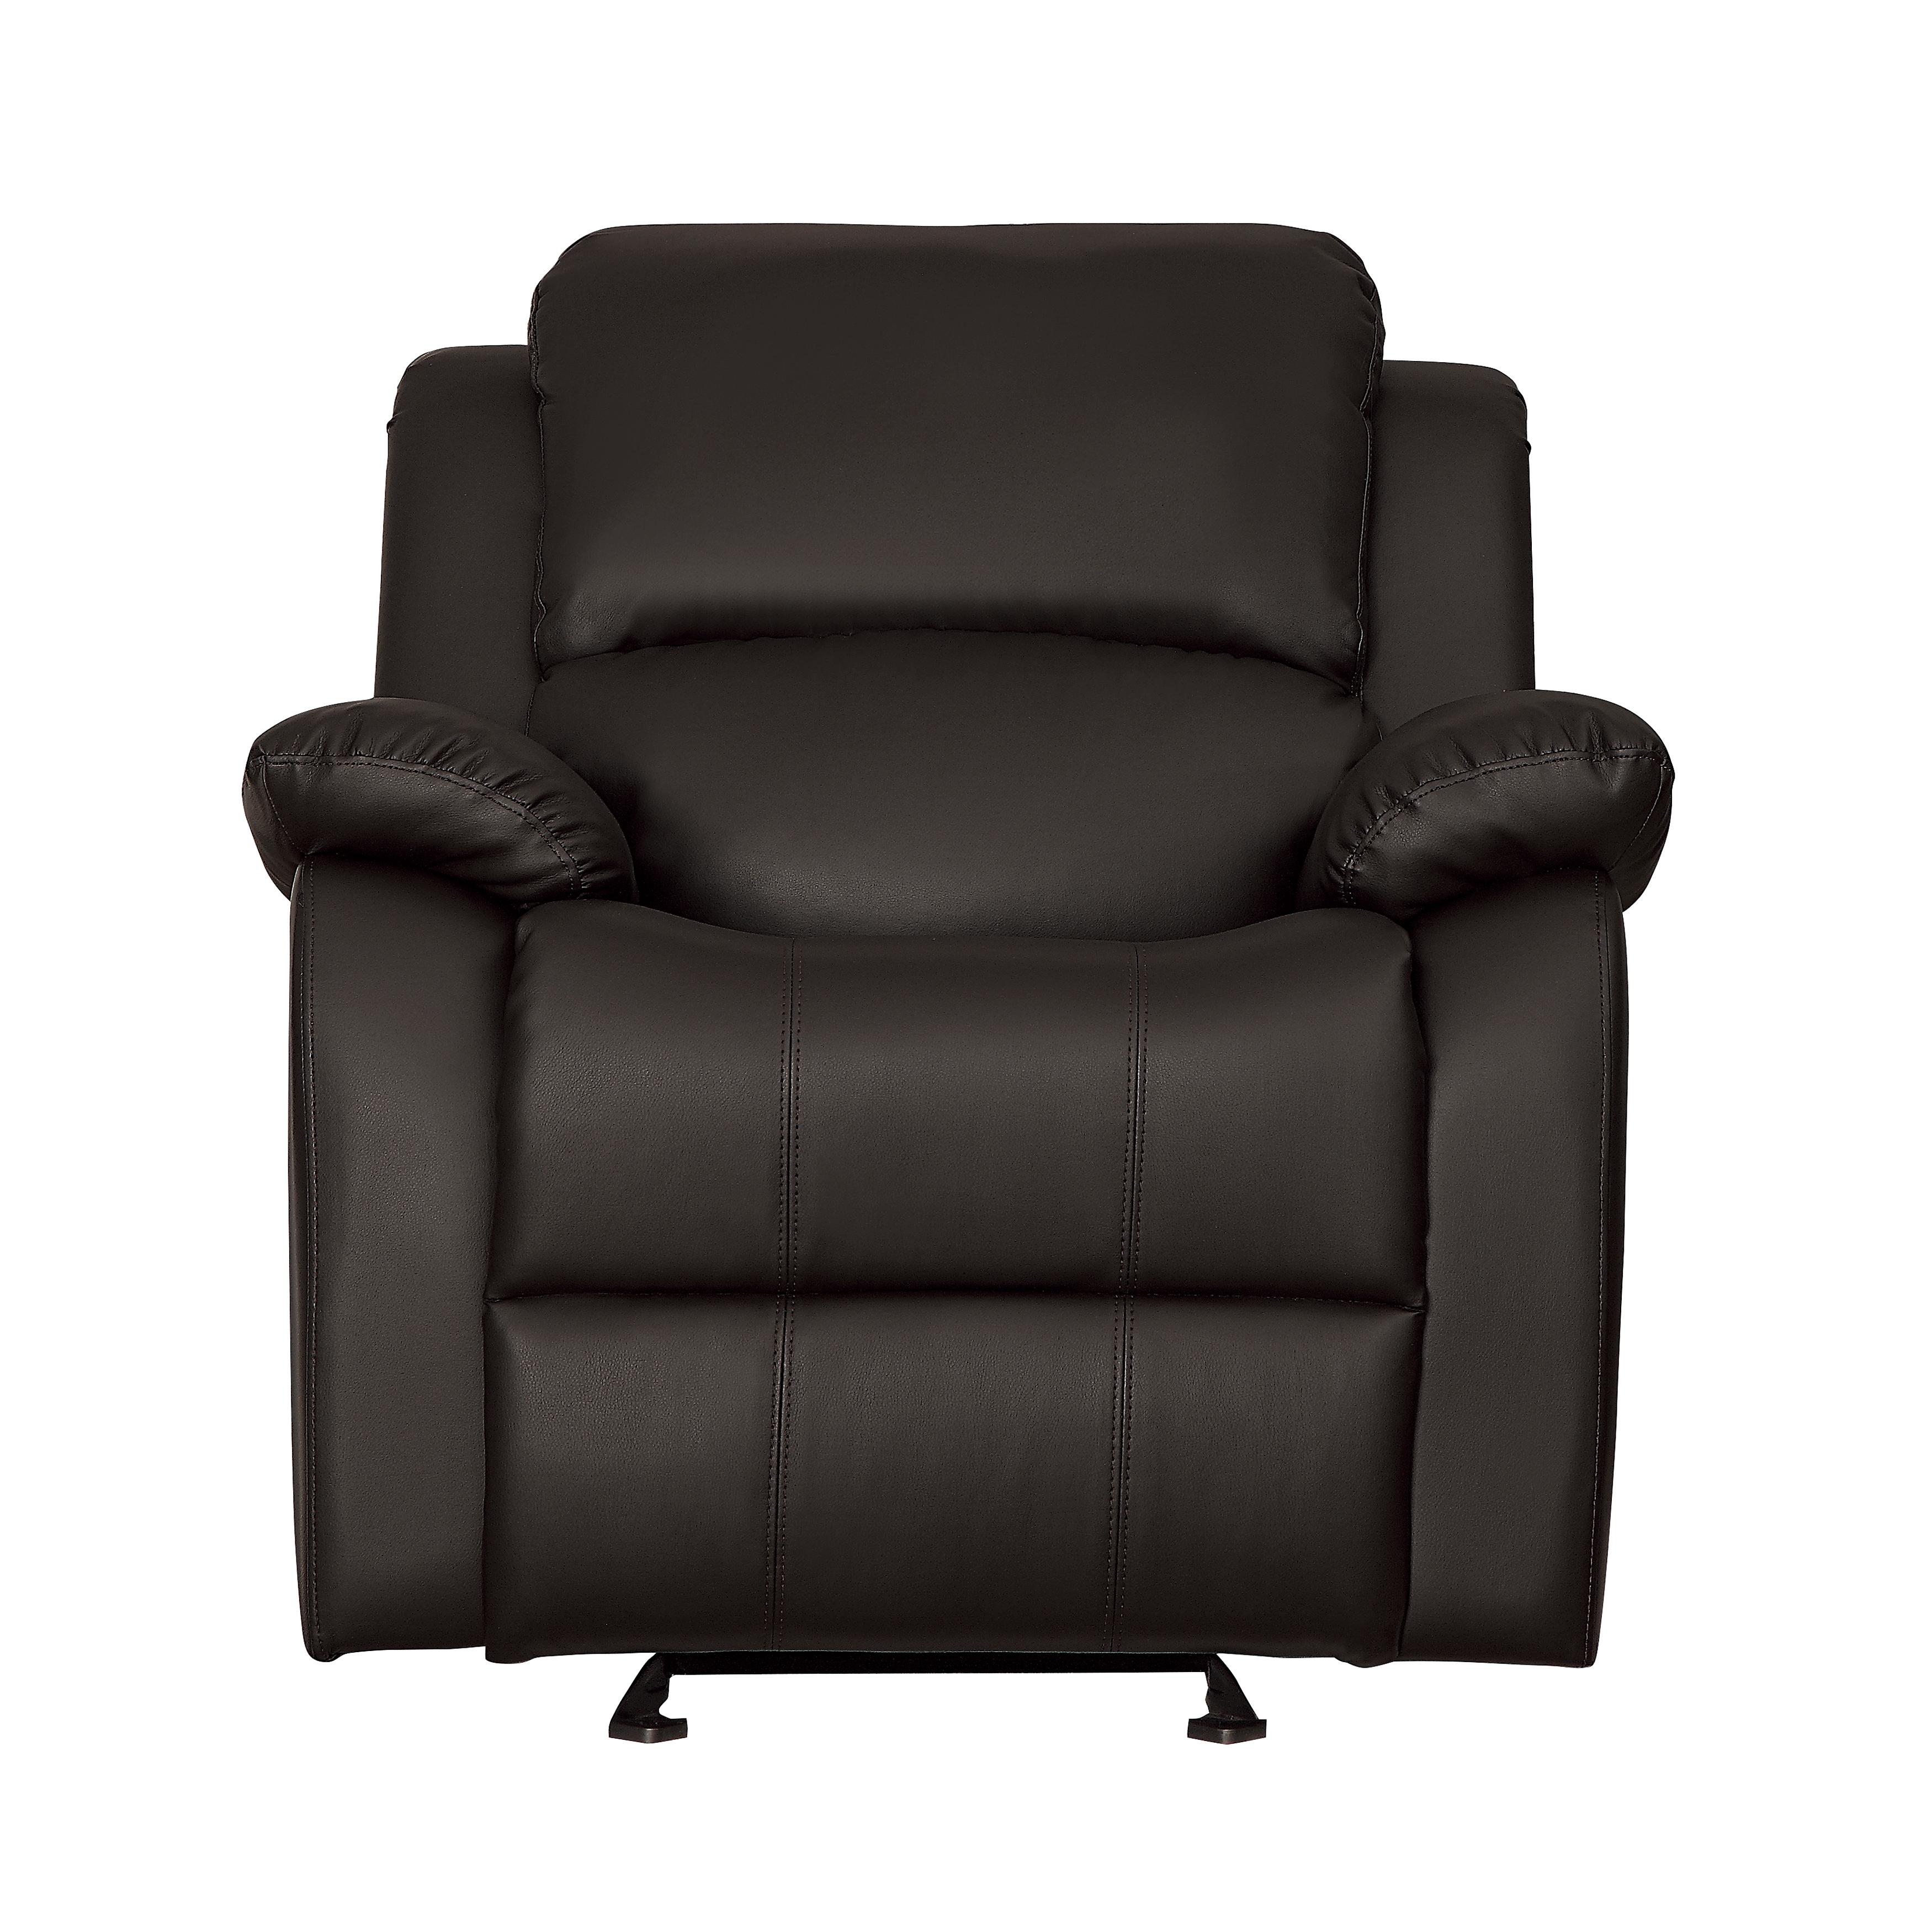 

    
Transitional Dark Brown Faux Leather Reclining Chair Homelegance 9928DBR-1 Clarkdale
